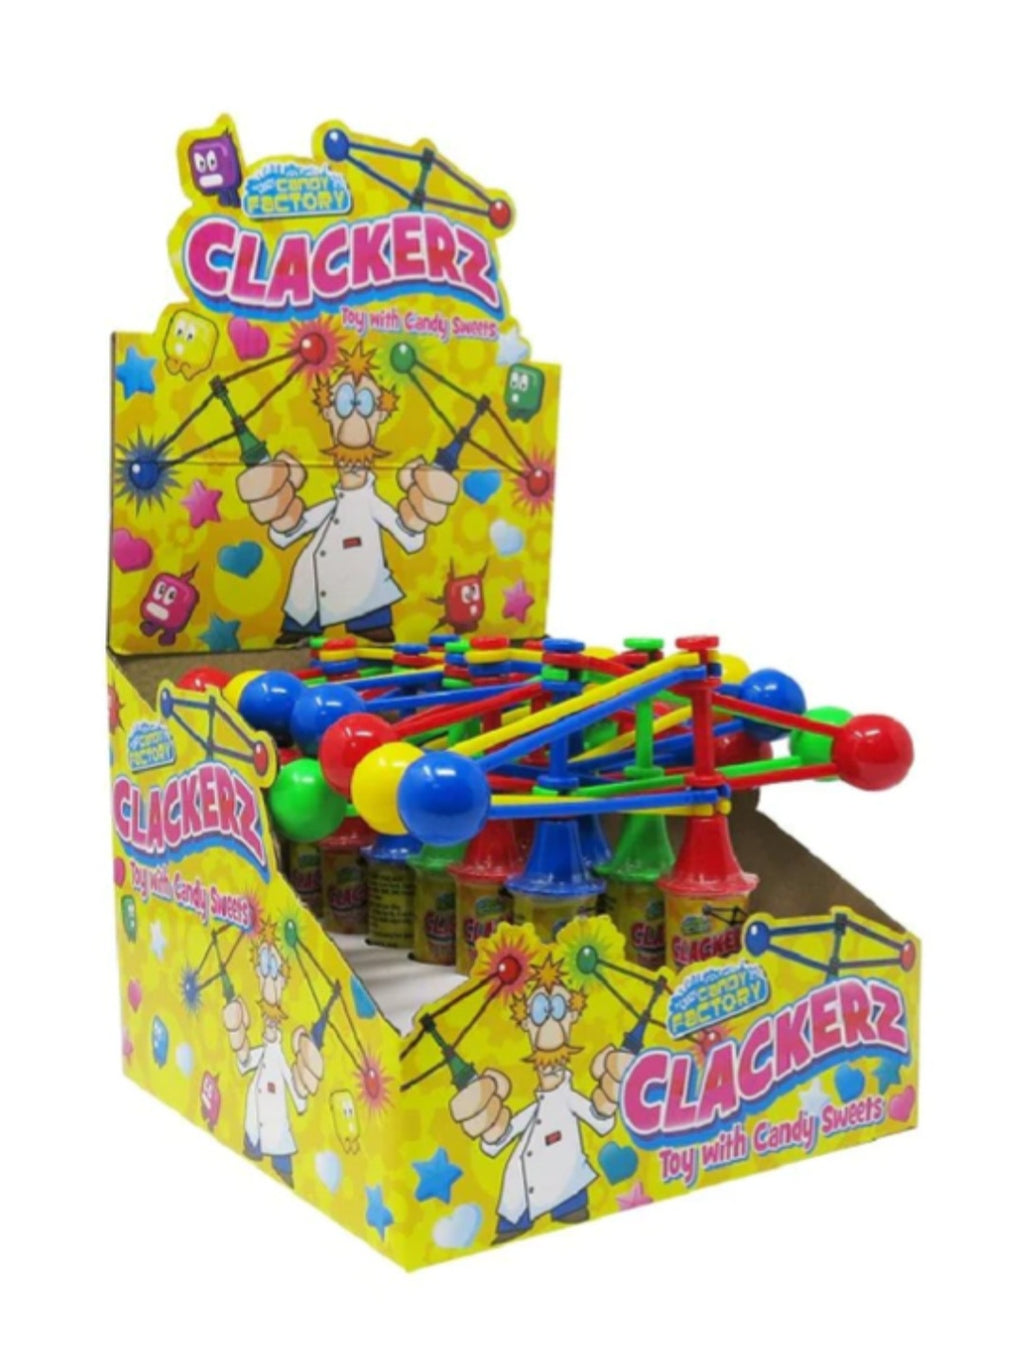 SALE: Candy Factory Clackerz Toy with Candy Sweets